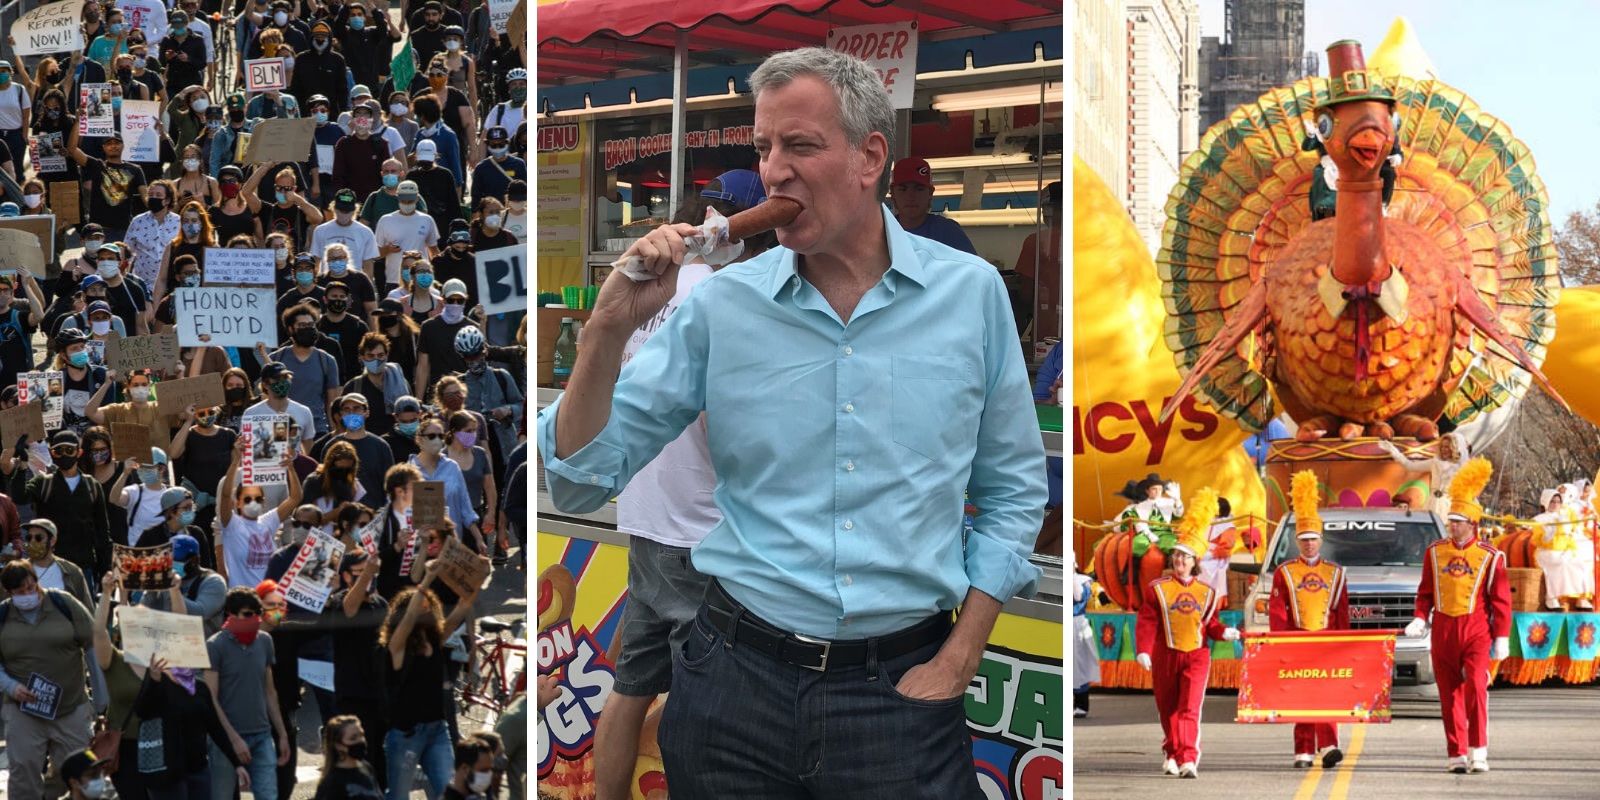 De Blasio announces 'reinvented' Macy's Thanksgiving Day Parade—mass protest can go on as usual